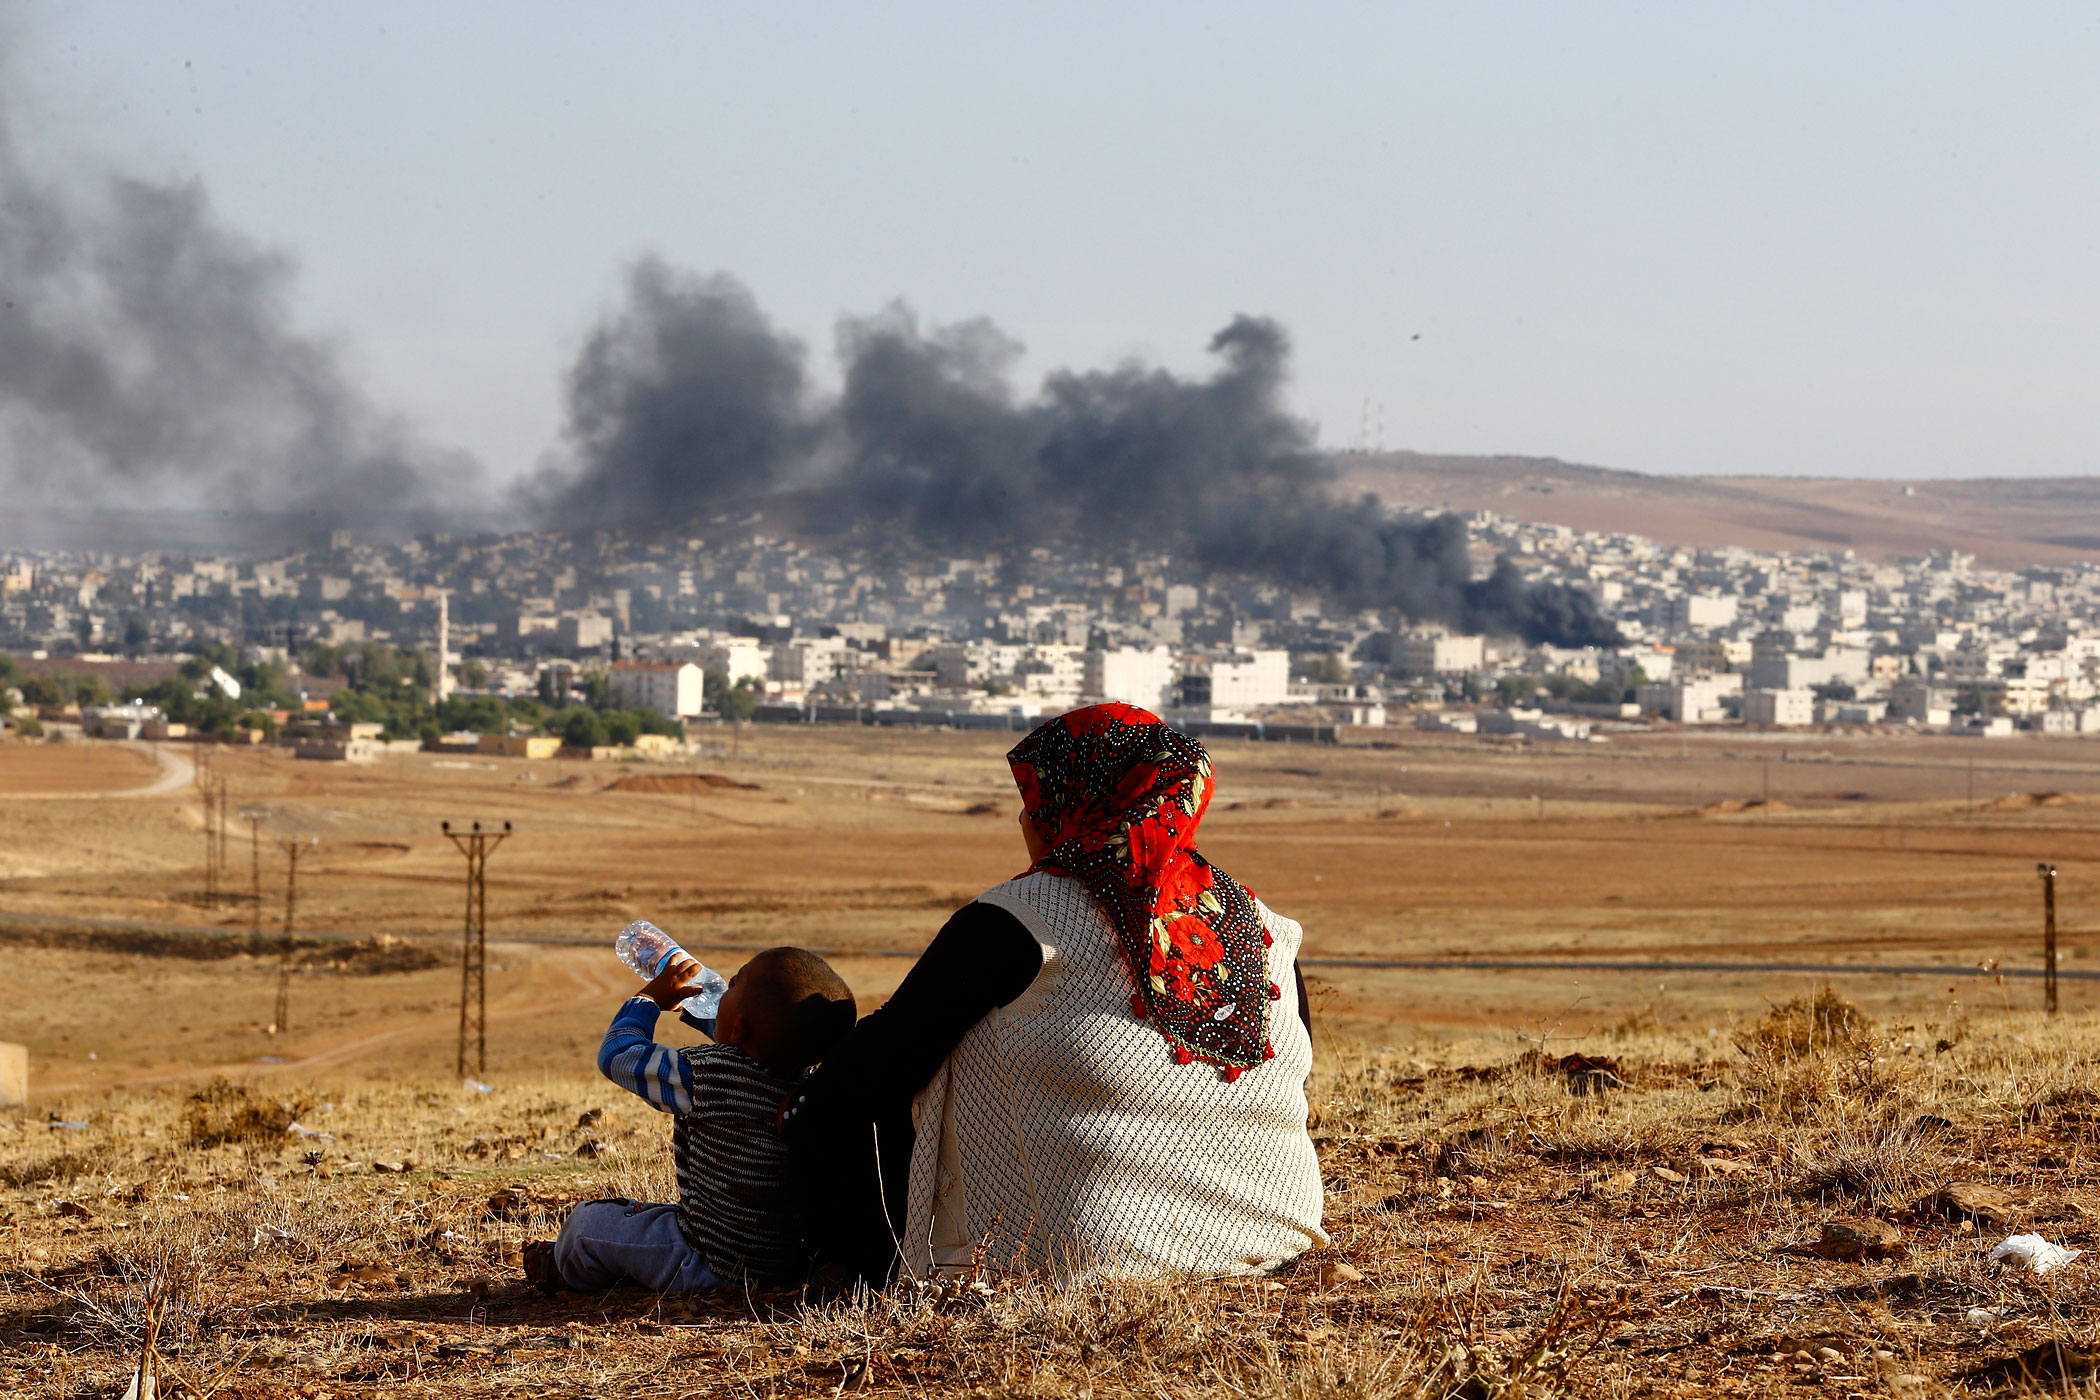 Turkish Kurds watch smoke rises over Syrian town of Kobani after an airstrike, as seen from the Mursitpinar border crossing on the Turkish-Syrian border